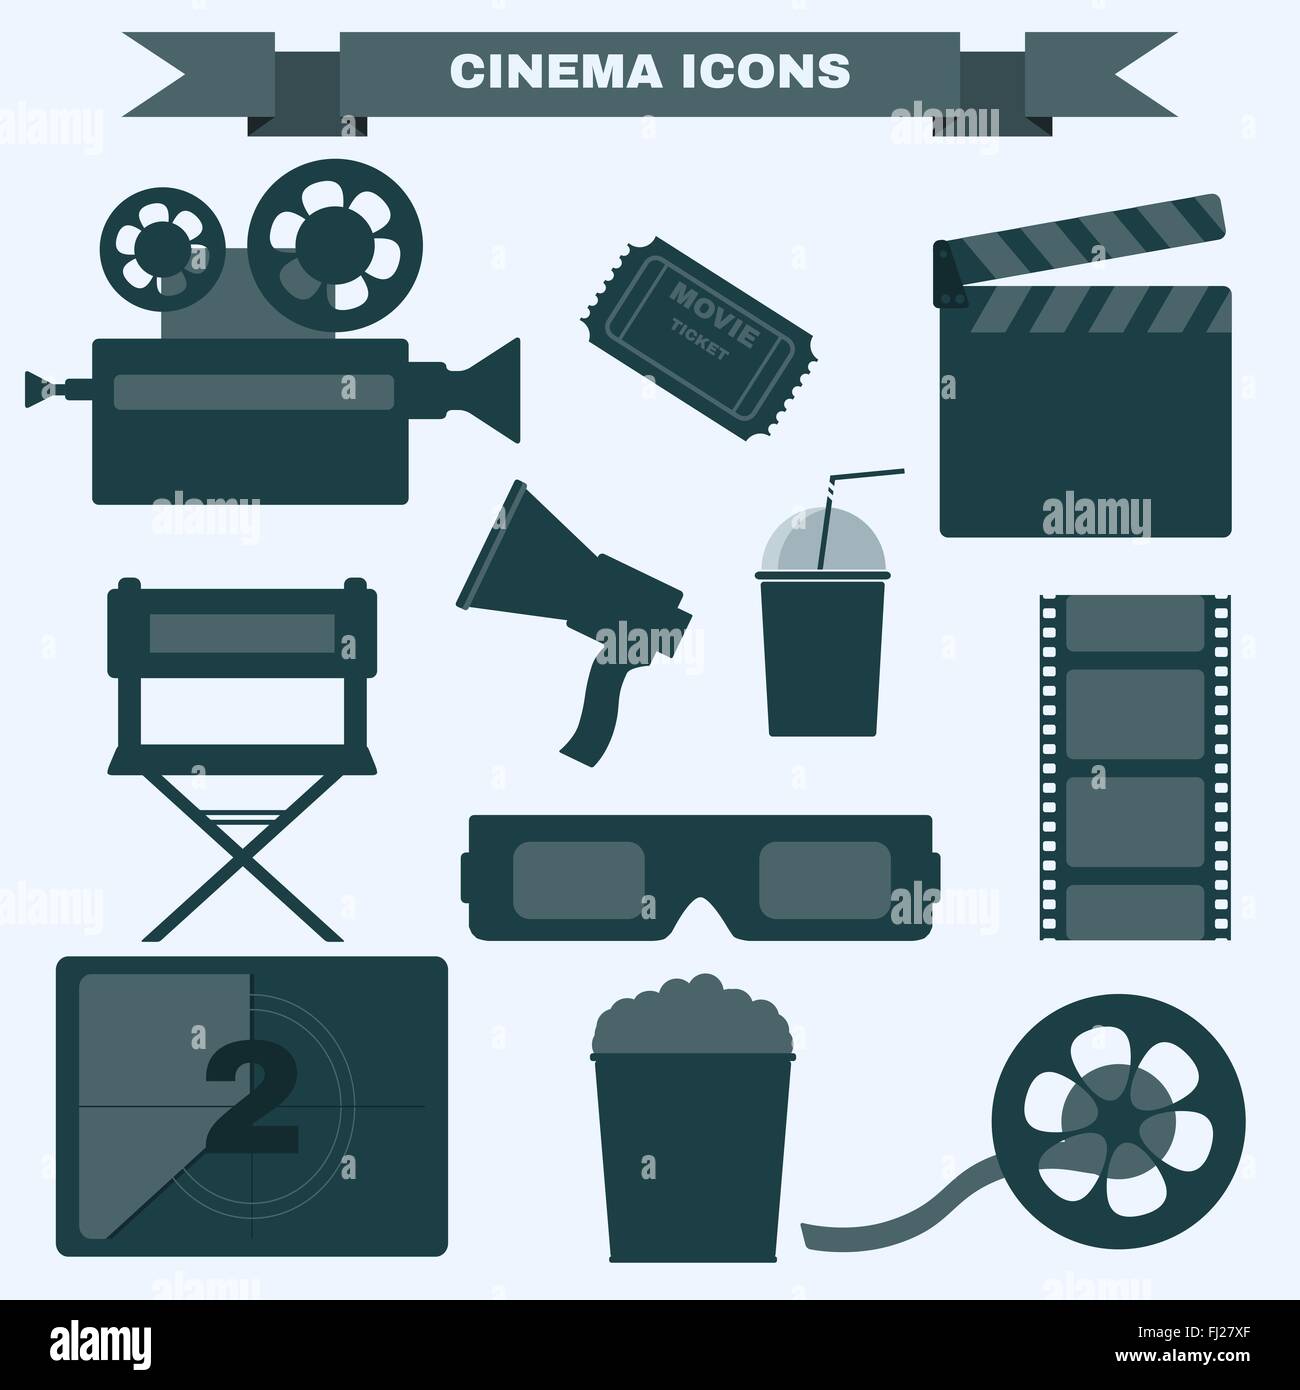 Cinema icon set. Making Movie. Camera, Movie  Ticket, Clapper board, Director's Seat, Loudhailer, Cocktail glass with tube. Stock Vector